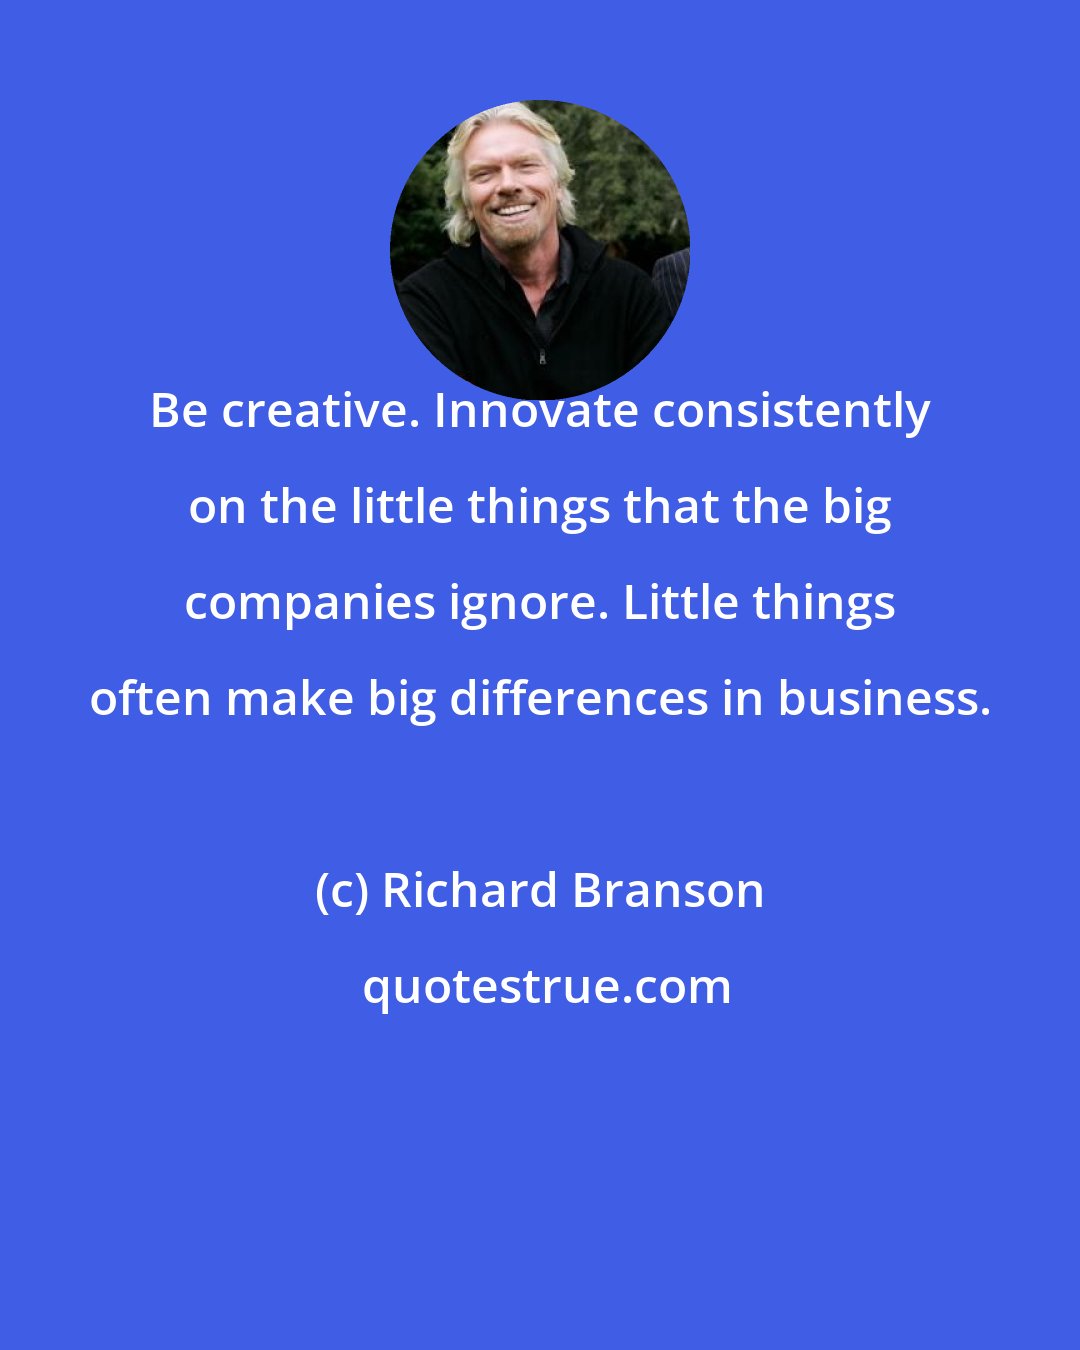 Richard Branson: Be creative. Innovate consistently on the little things that the big companies ignore. Little things often make big differences in business.